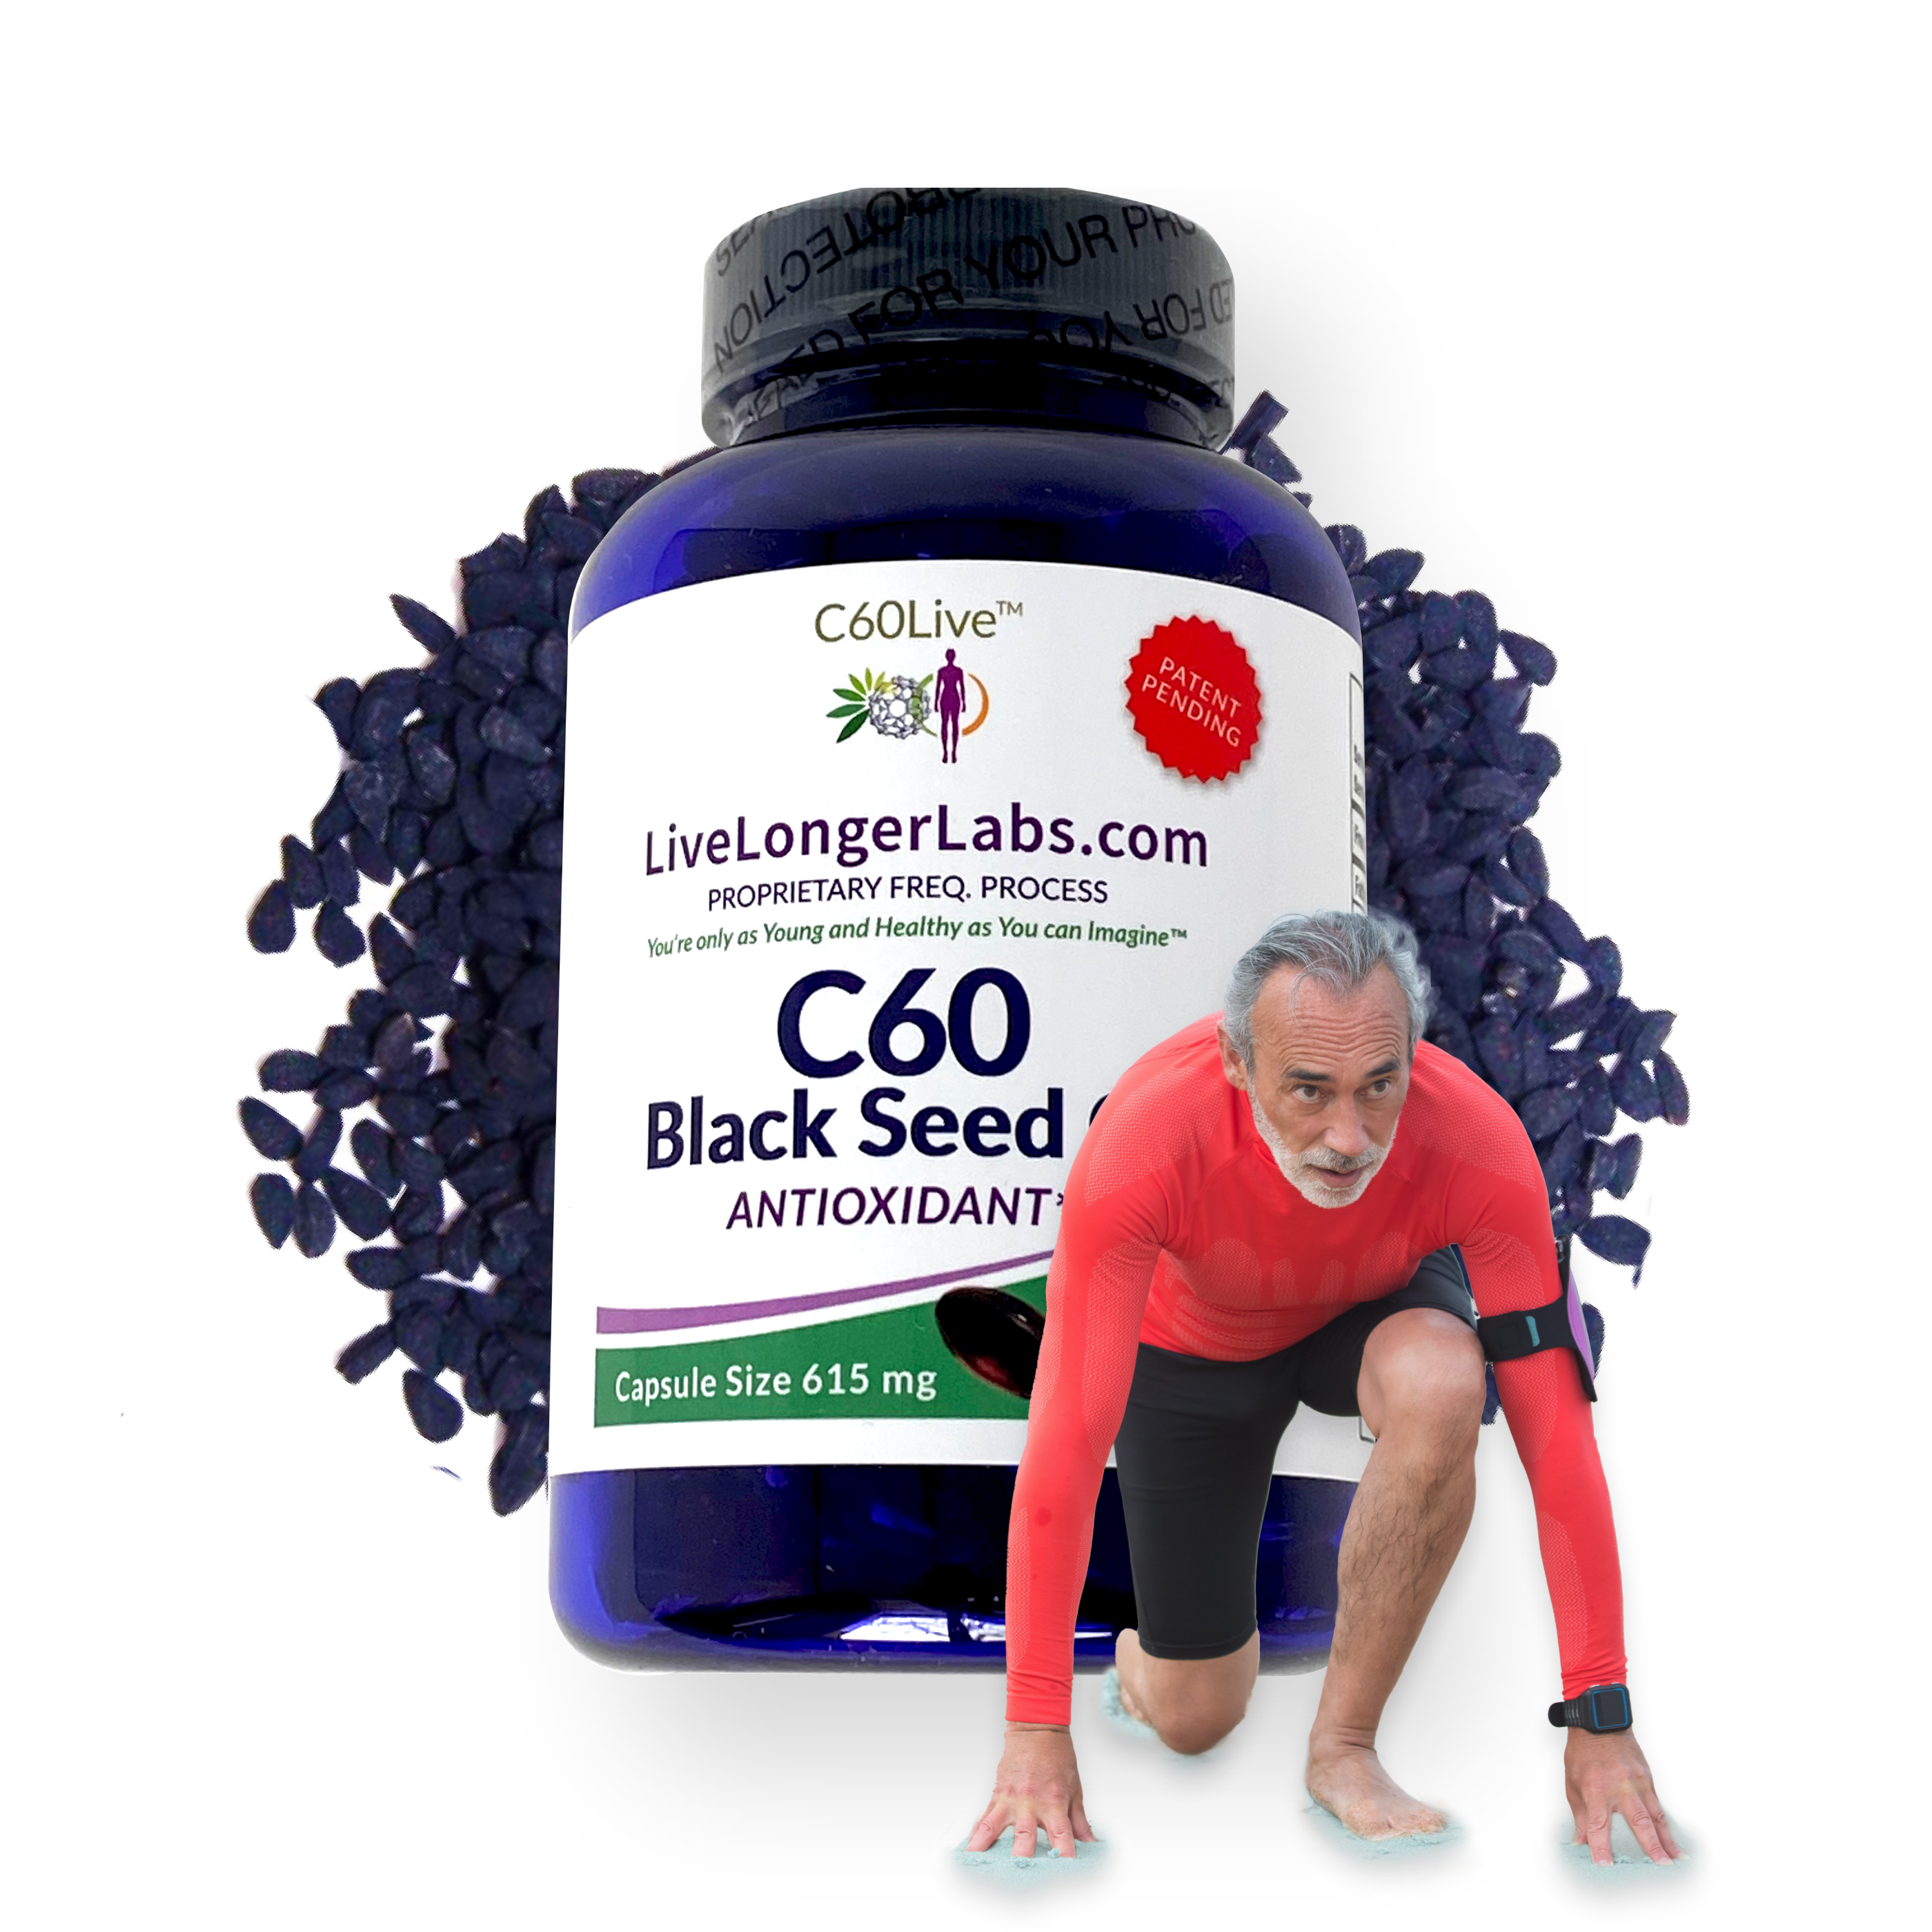 An image of a bottle of C60 Complete Black Seed Oil Antioxidant.